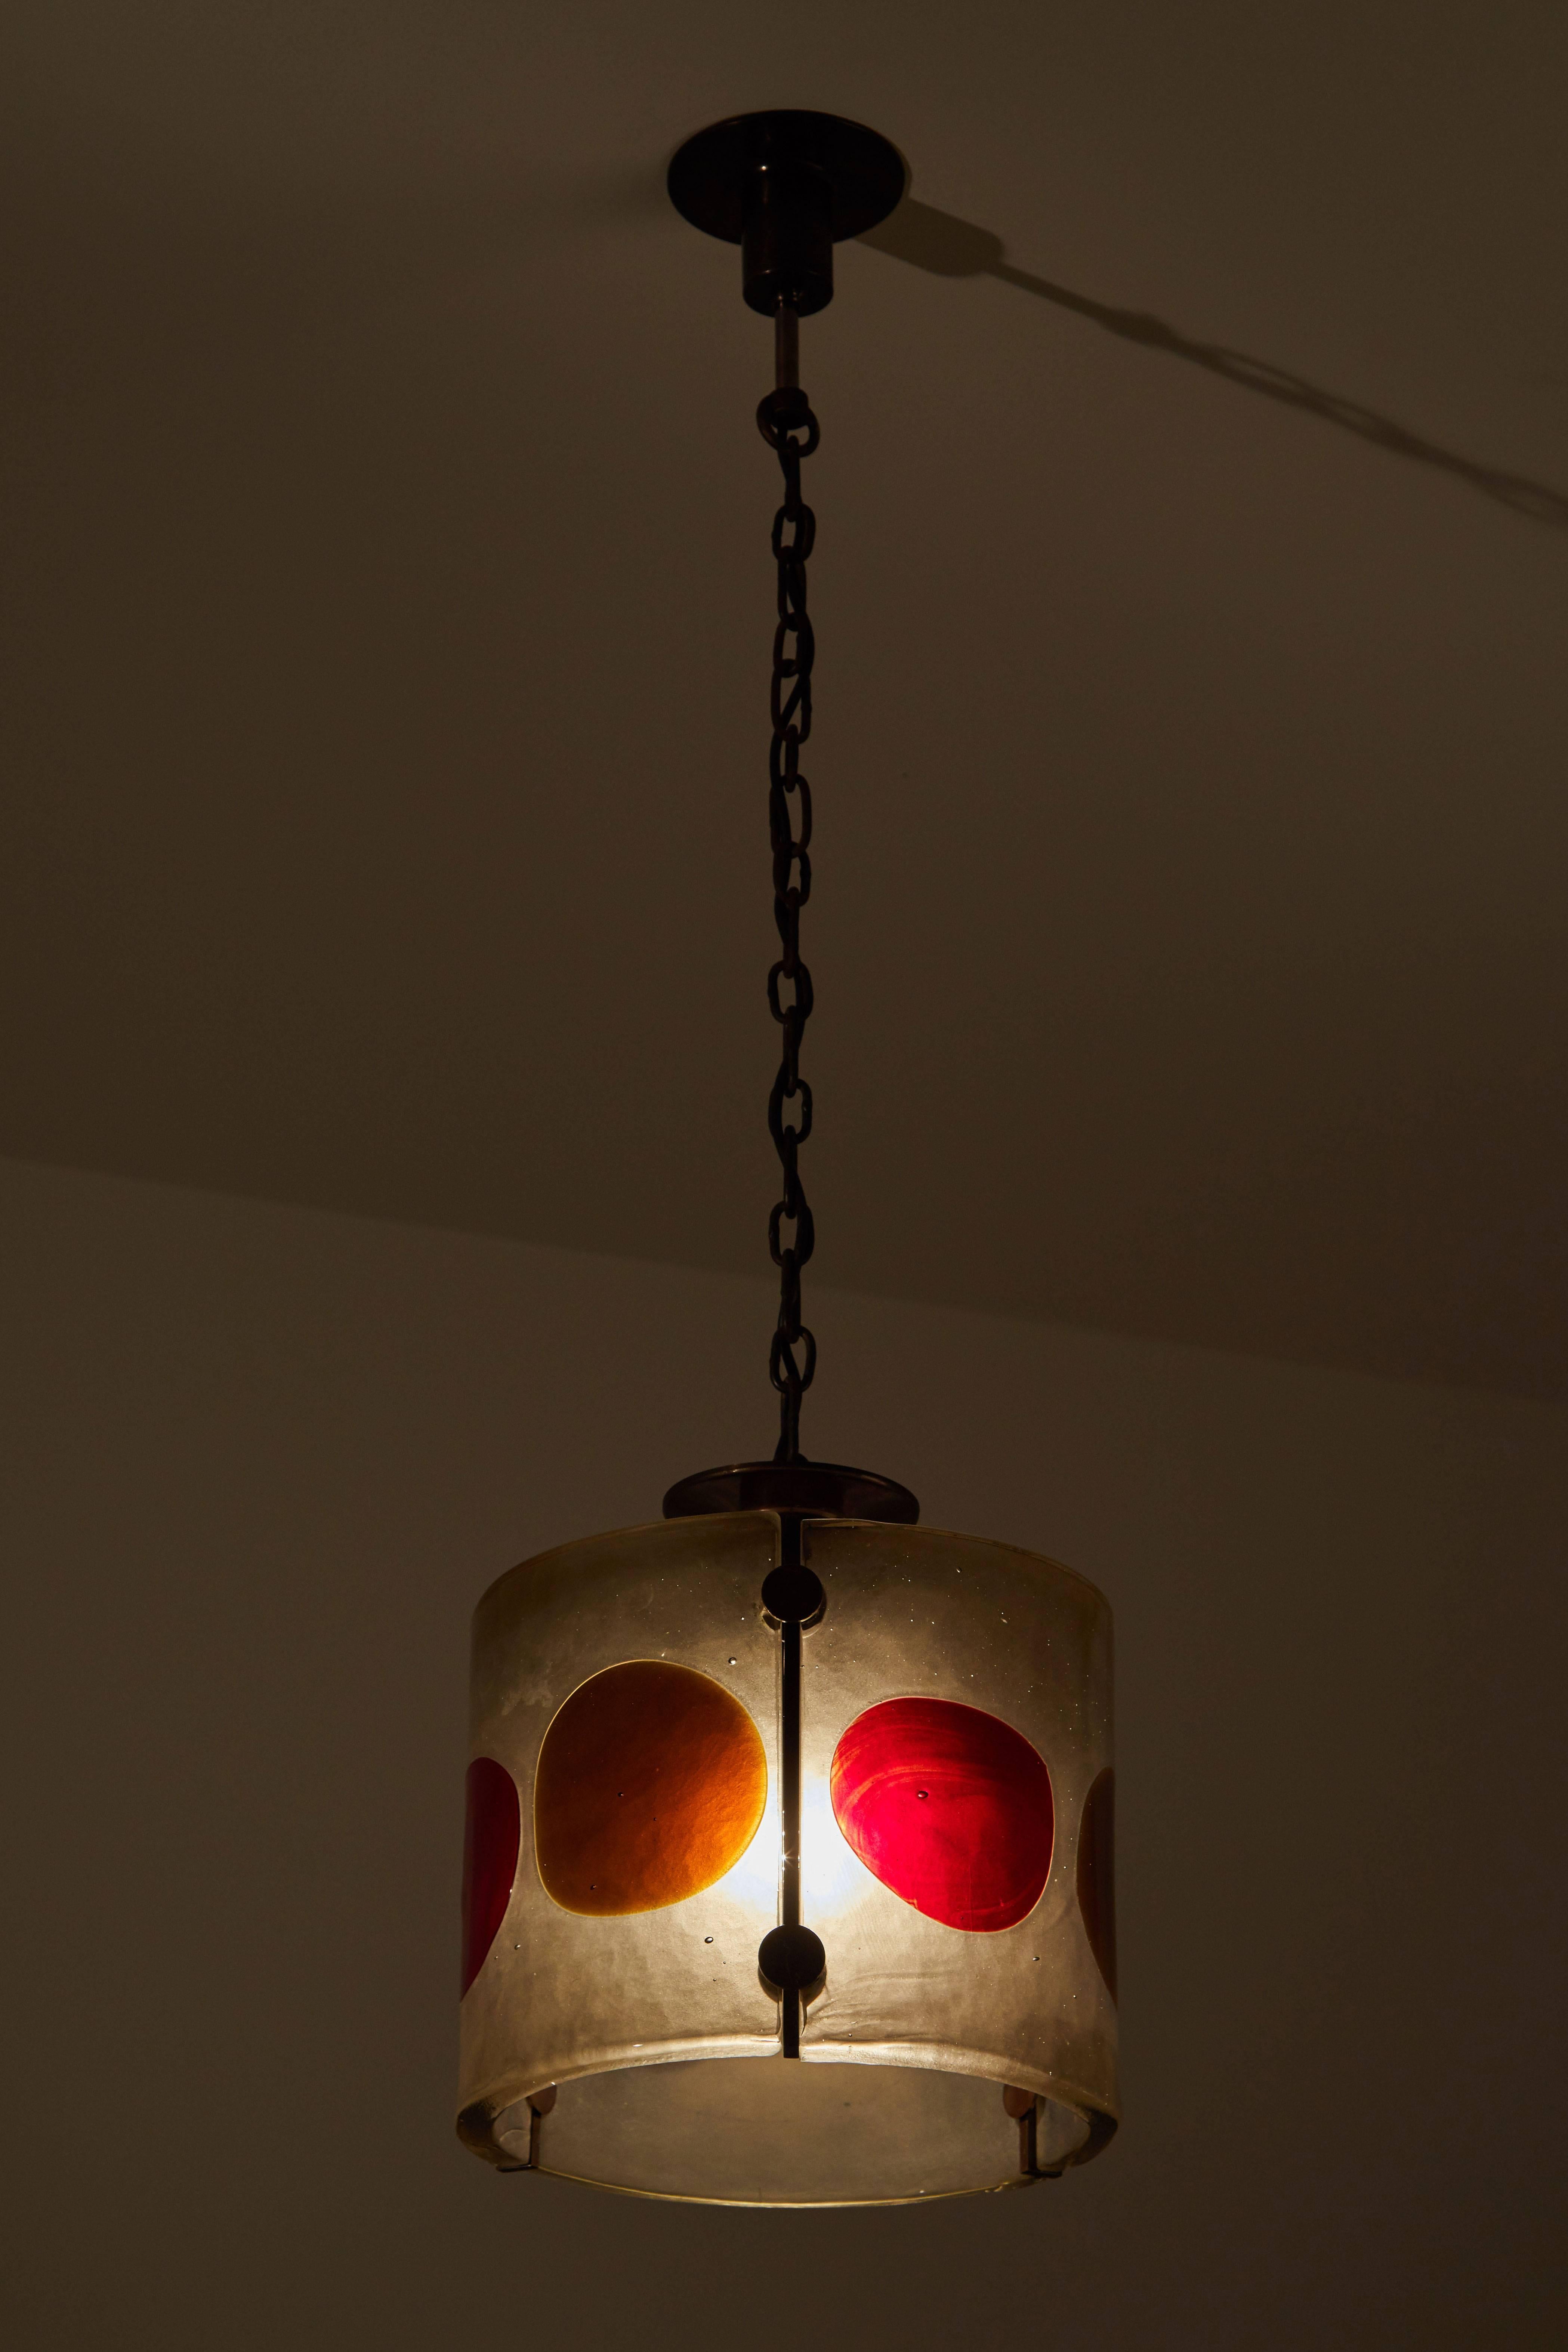 Thick textured hand cast glass suspension light designed by Venini in Italy, circa 1950s. Original bronze hardware and chain, custom canopy, wired for US junction boxes. Takes one E27 100w maximum bulb.